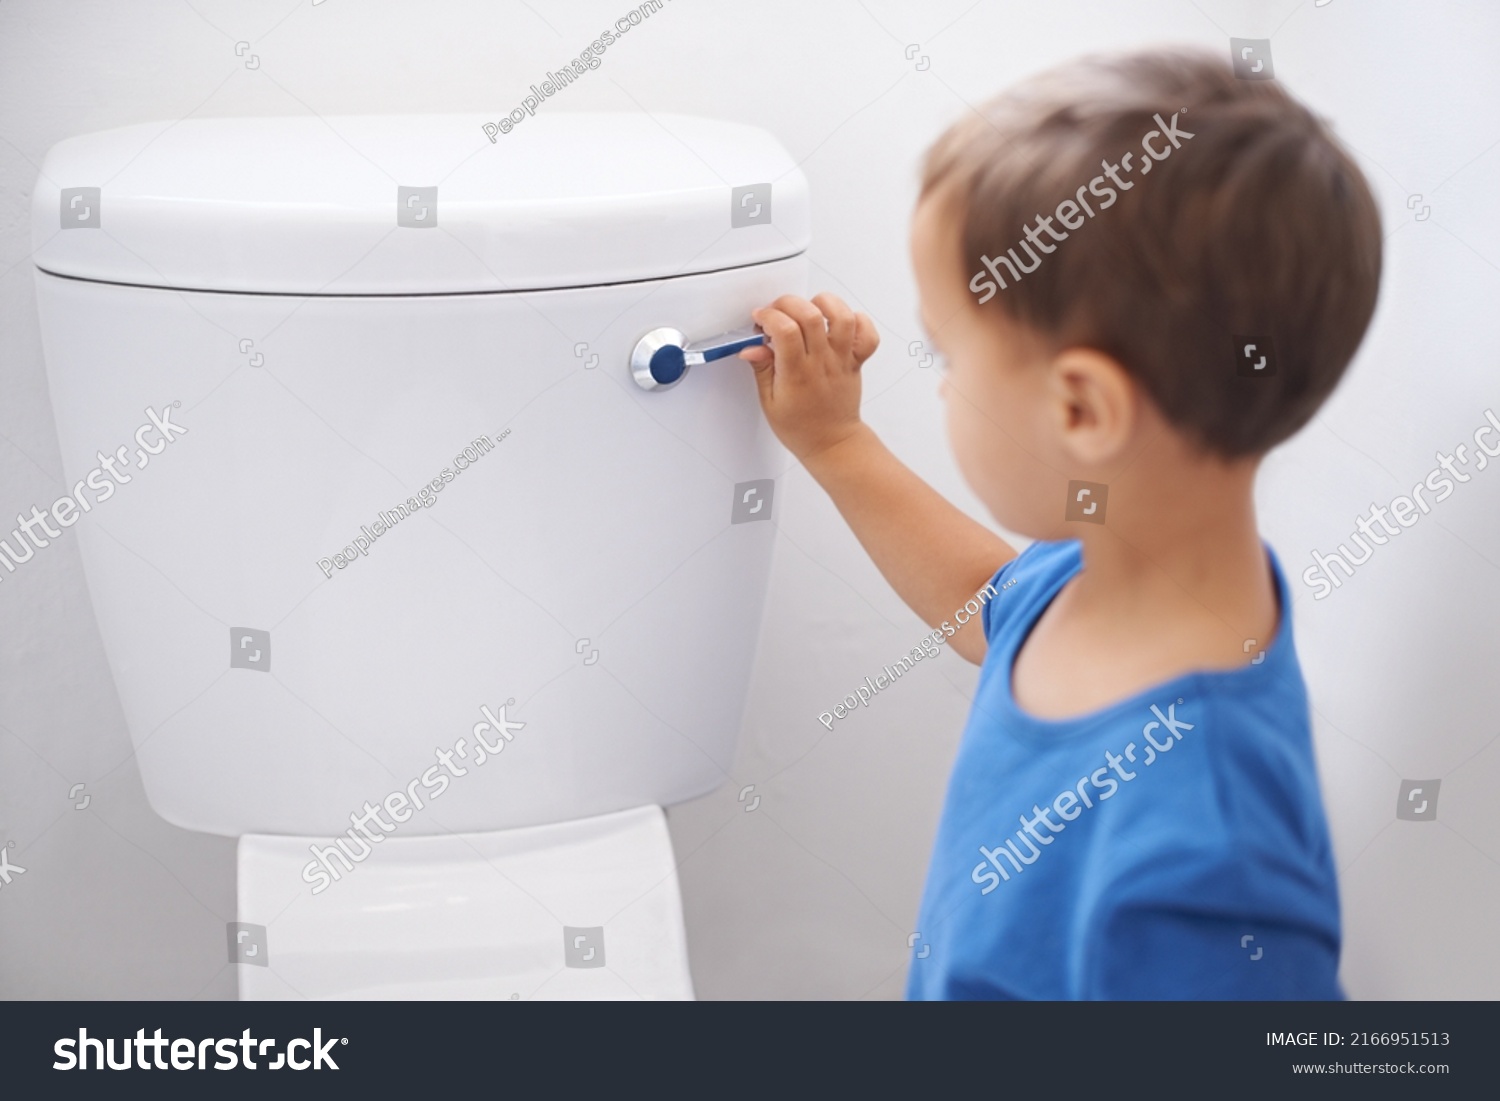 All done. Shot of a cute young boy flushing a toilet. #2166951513